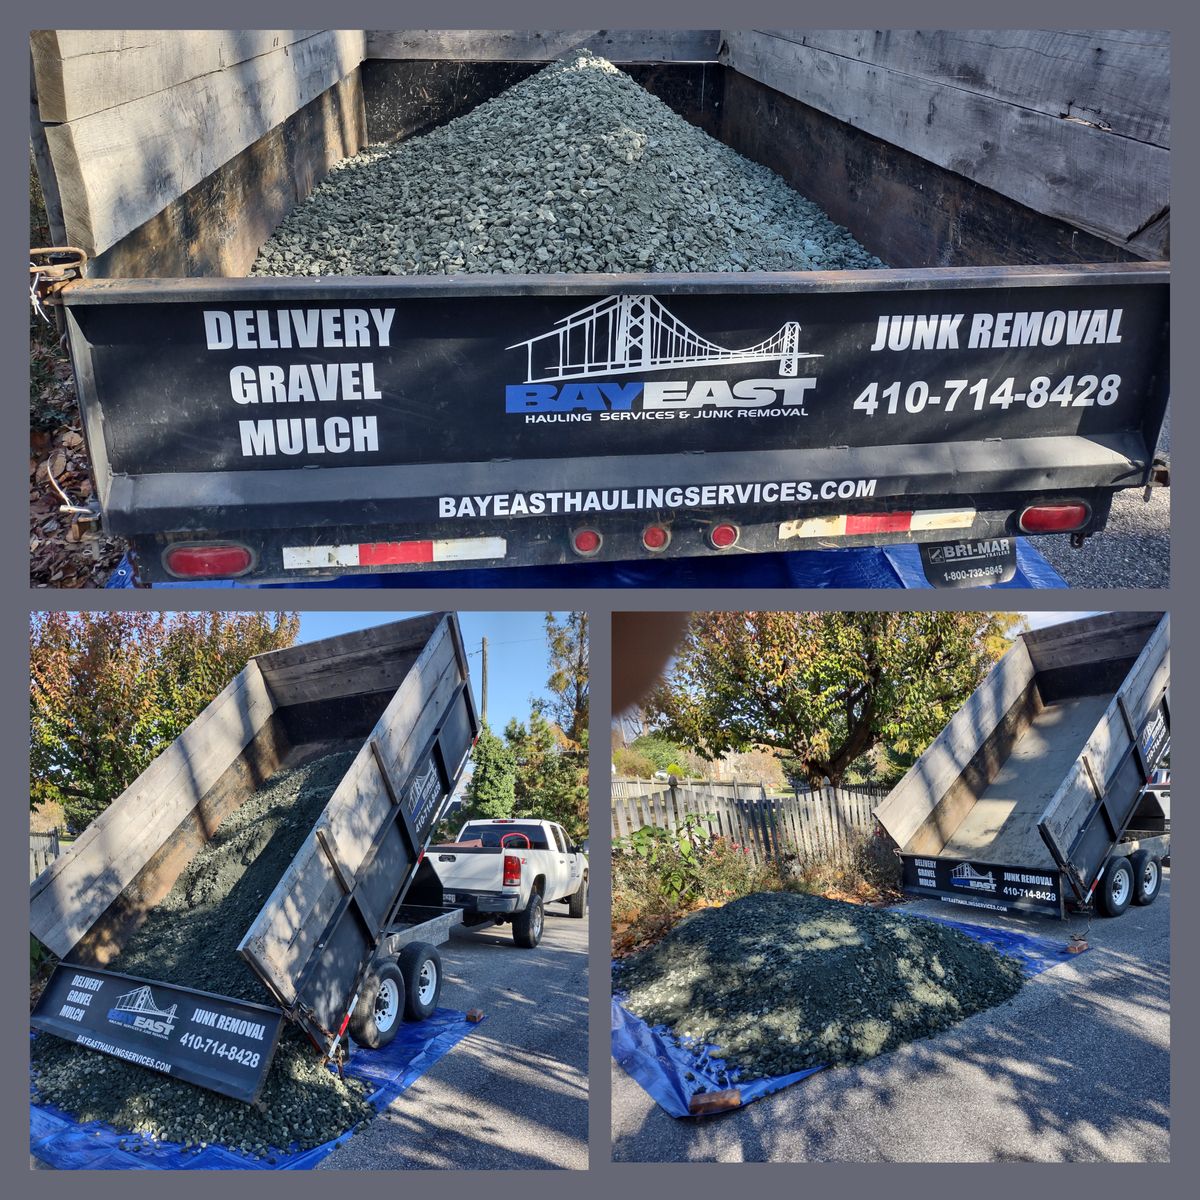 Aggregate Deliveries / Dump Trailer Services for Bay East Hauling Services & Junk Removal in Grasonville, MD